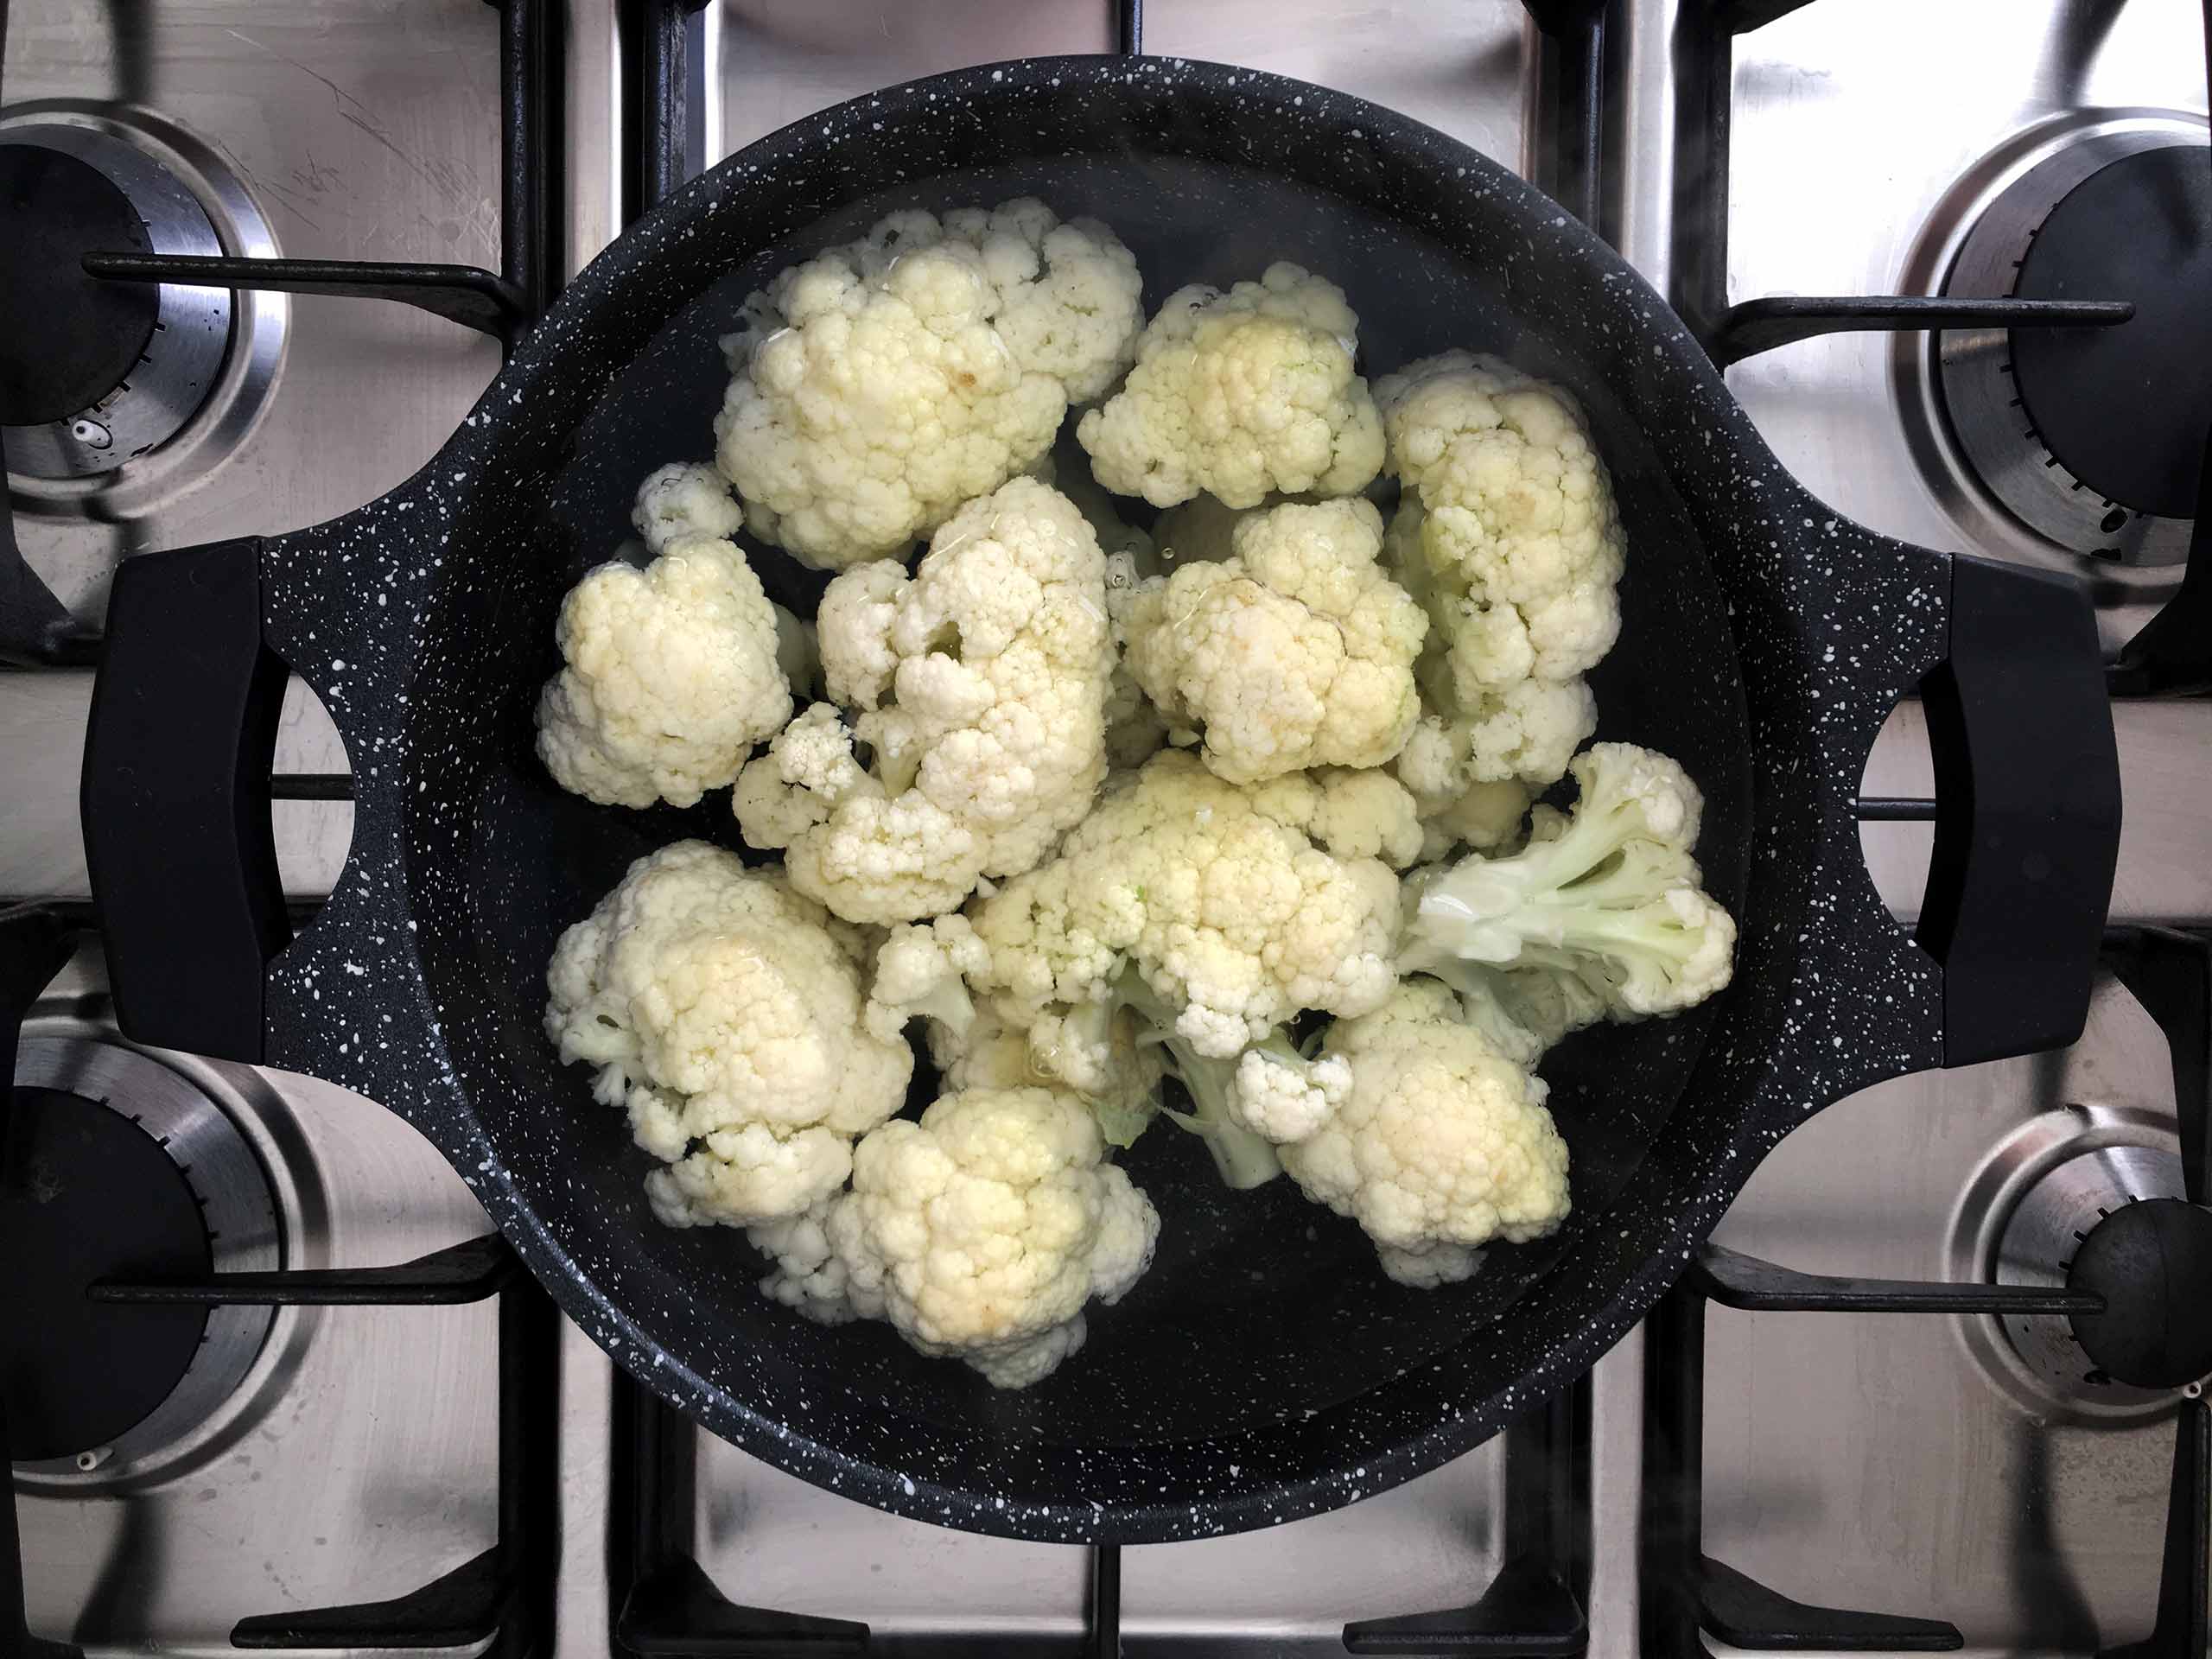 place the cauliflowers in the boiling water